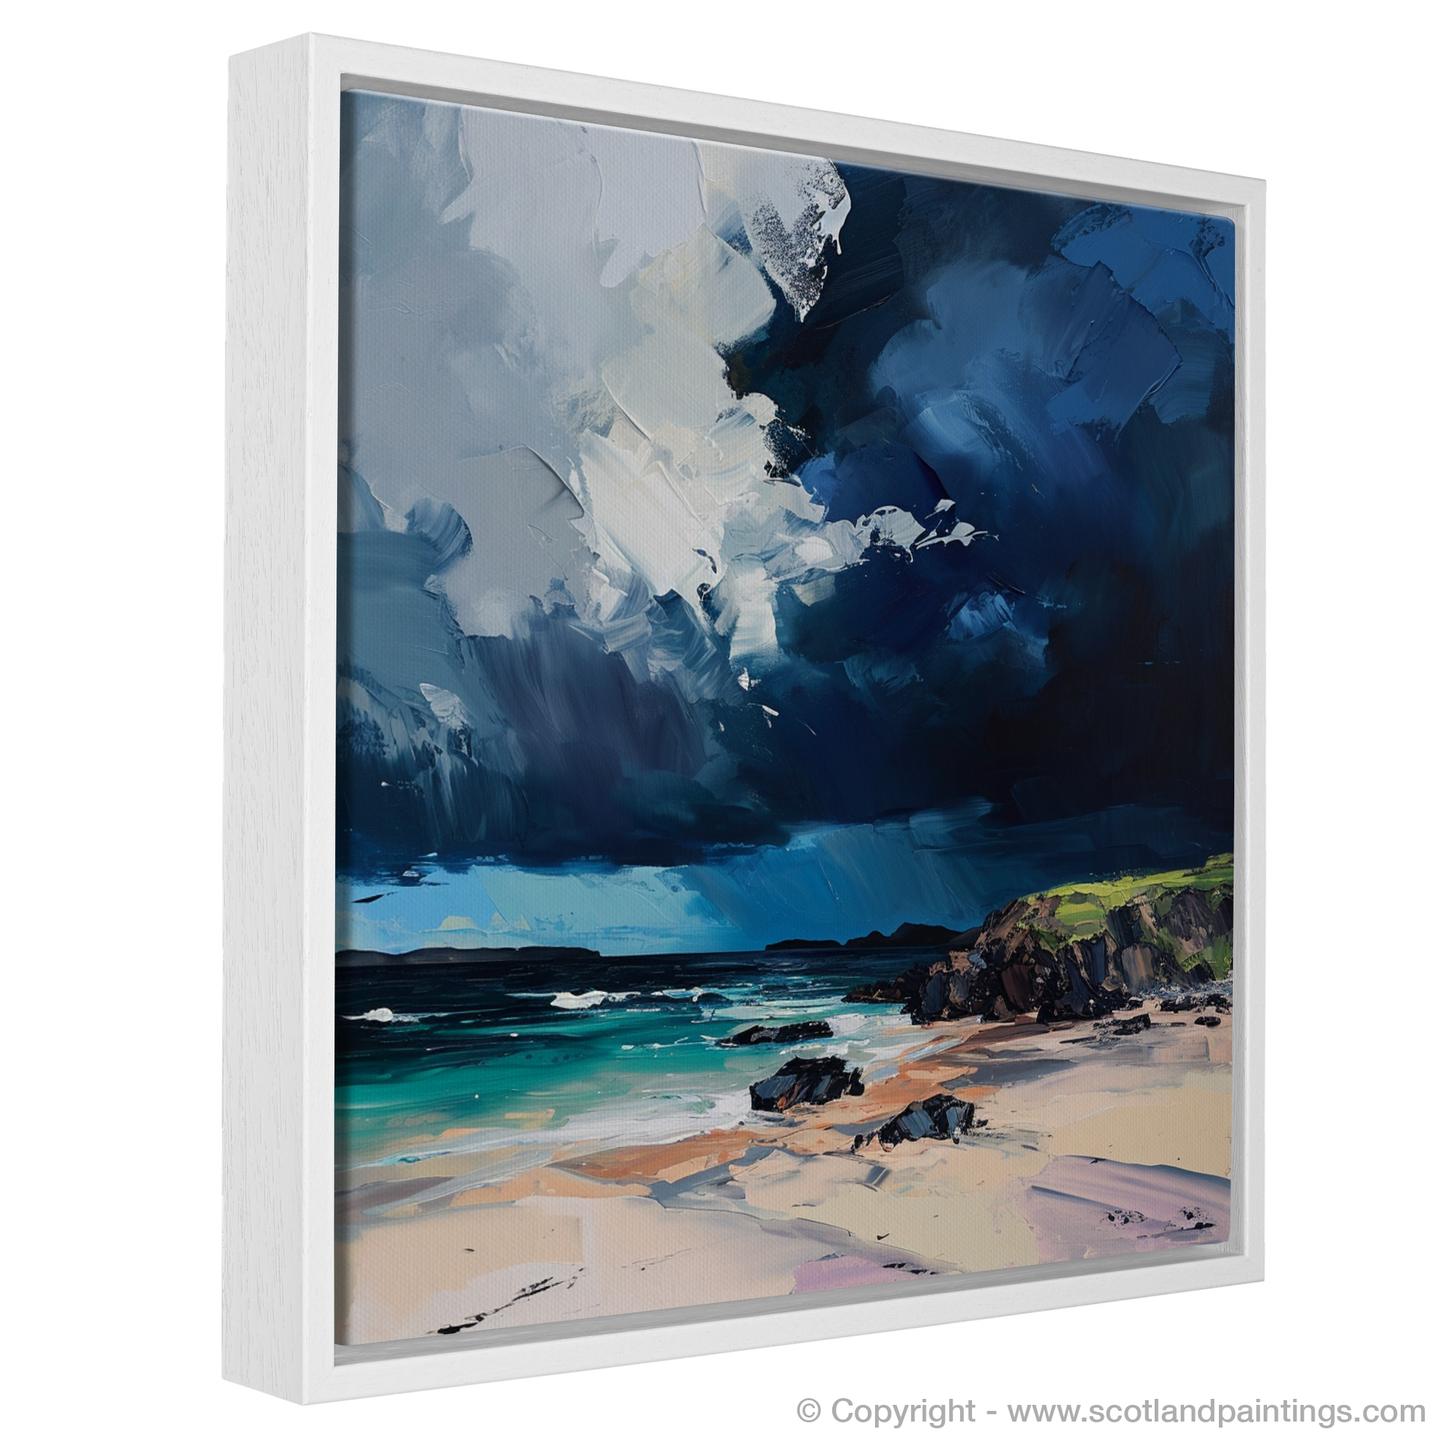 Painting and Art Print of Balnakeil Bay with a stormy sky entitled "Stormy Embrace of Balnakeil Bay".